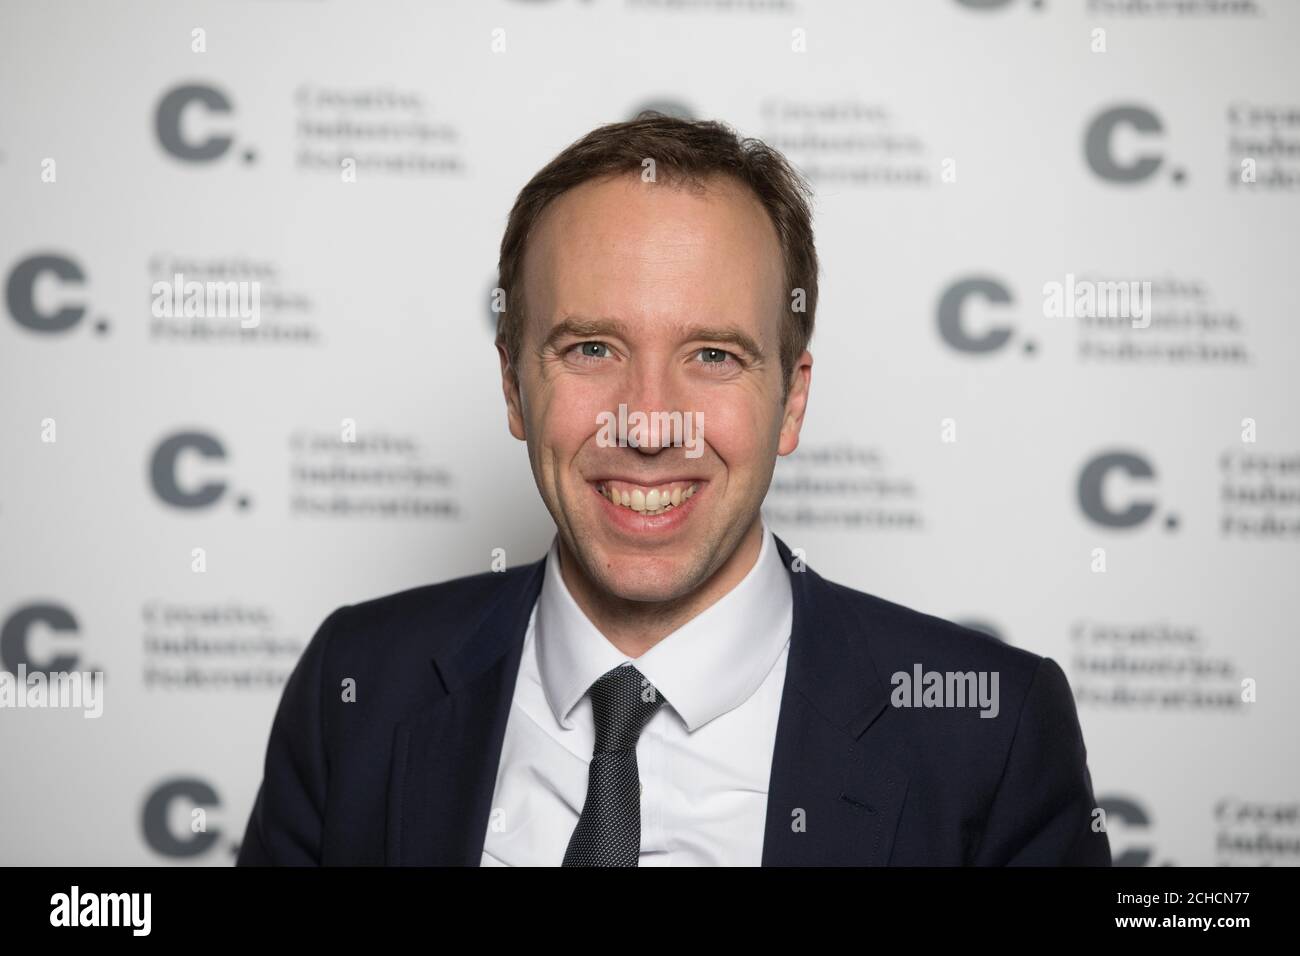 Newly appointed Secretary of State for Digital, Culture, Media and Sport Matt Hancock attends the Creative Industries Federation's third birthday party at the Natural History Museum, London. PRESS ASSOCIATION. Photo. Picture date: Tuesday January 9, 2018. The evening featured the launch of Circus 250, a year-long, nationwide celebration of the 250th anniversary of the Circus, including a strong woman and aerial acrobatics. Photo credit should read: David Parry/PA Wire Stock Photo